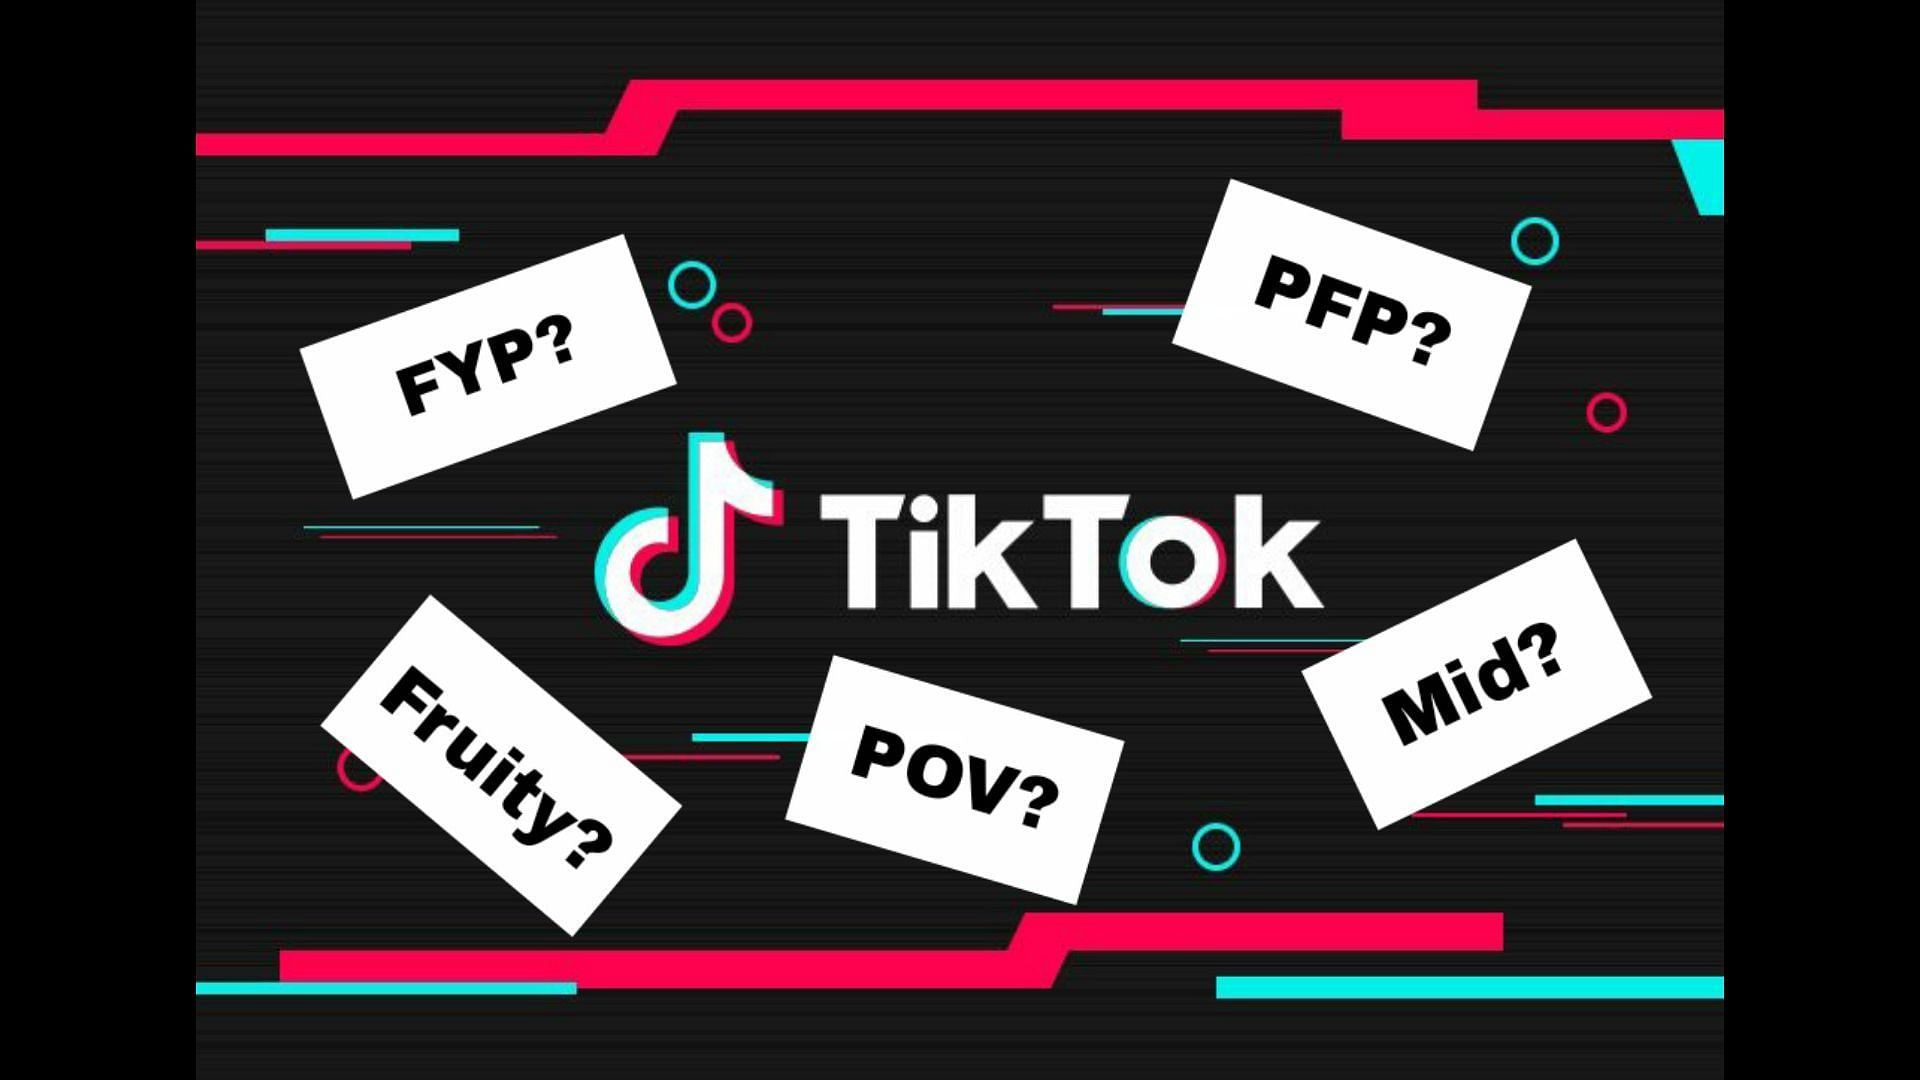 Internet S Guide To Tiktok Slang Meaning Of Fyp Pov Pfp Mid And